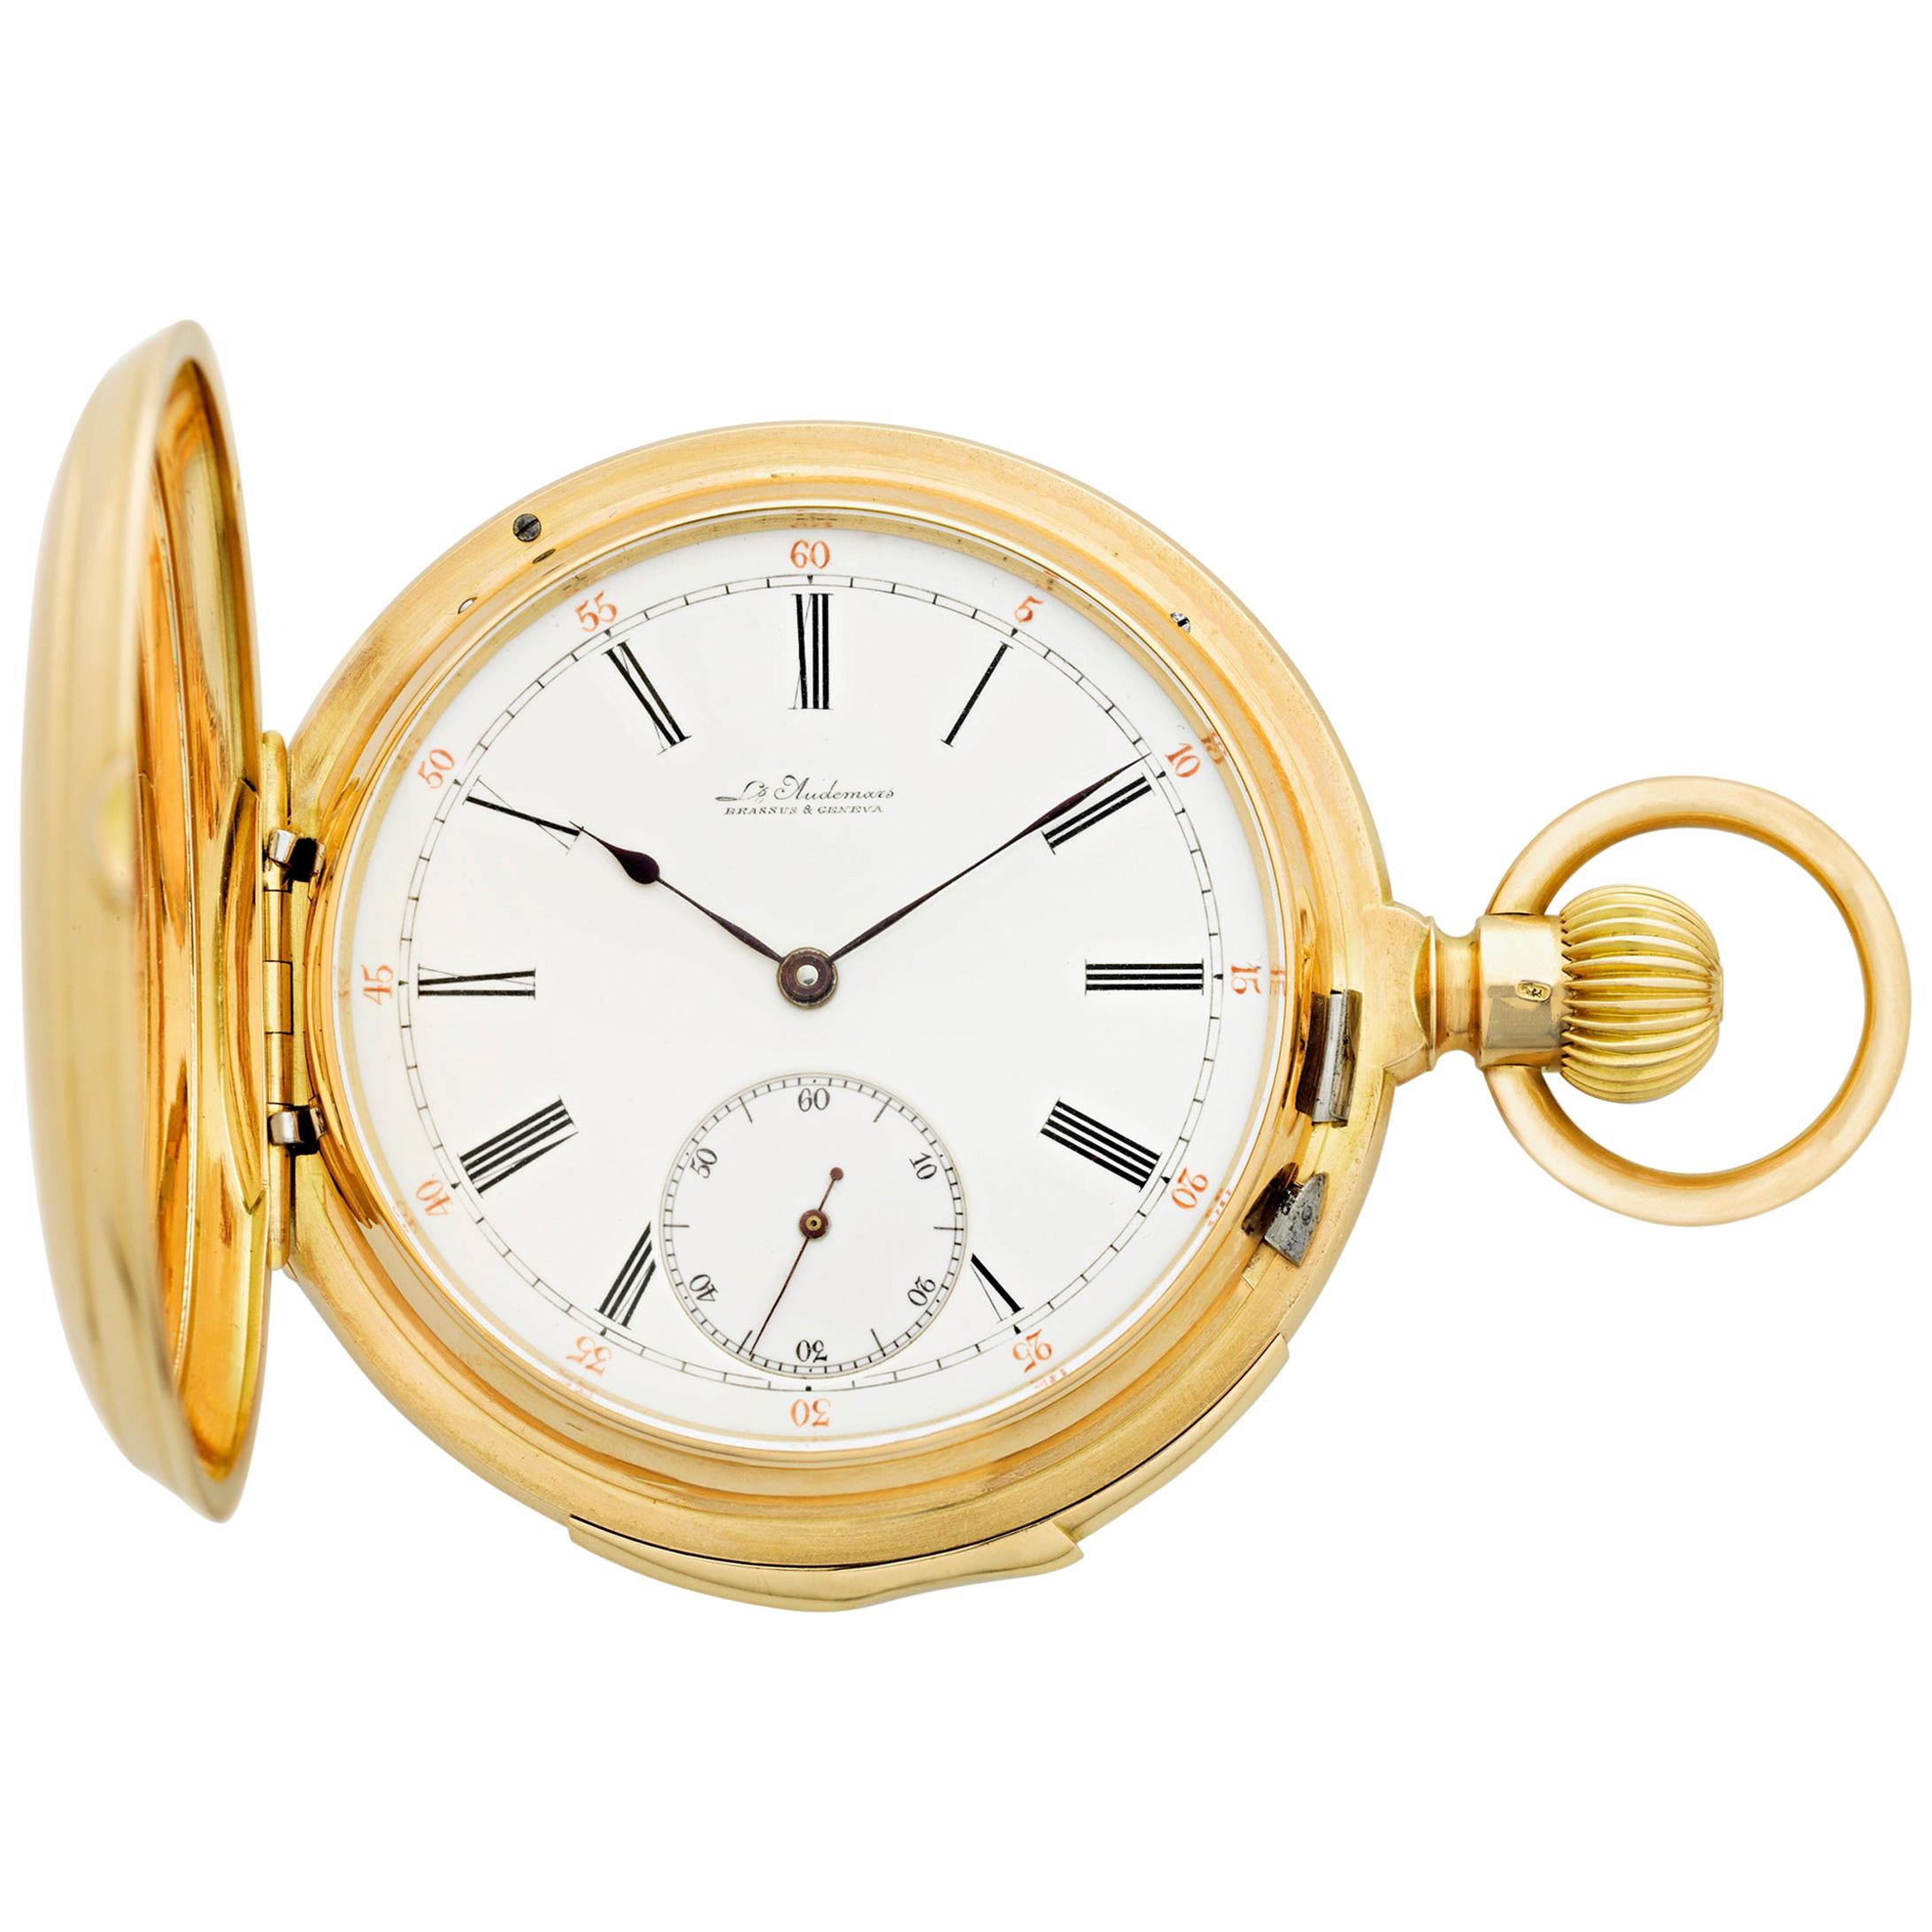 Gold Minute Repeater Pocket Watch by Louis Audemars